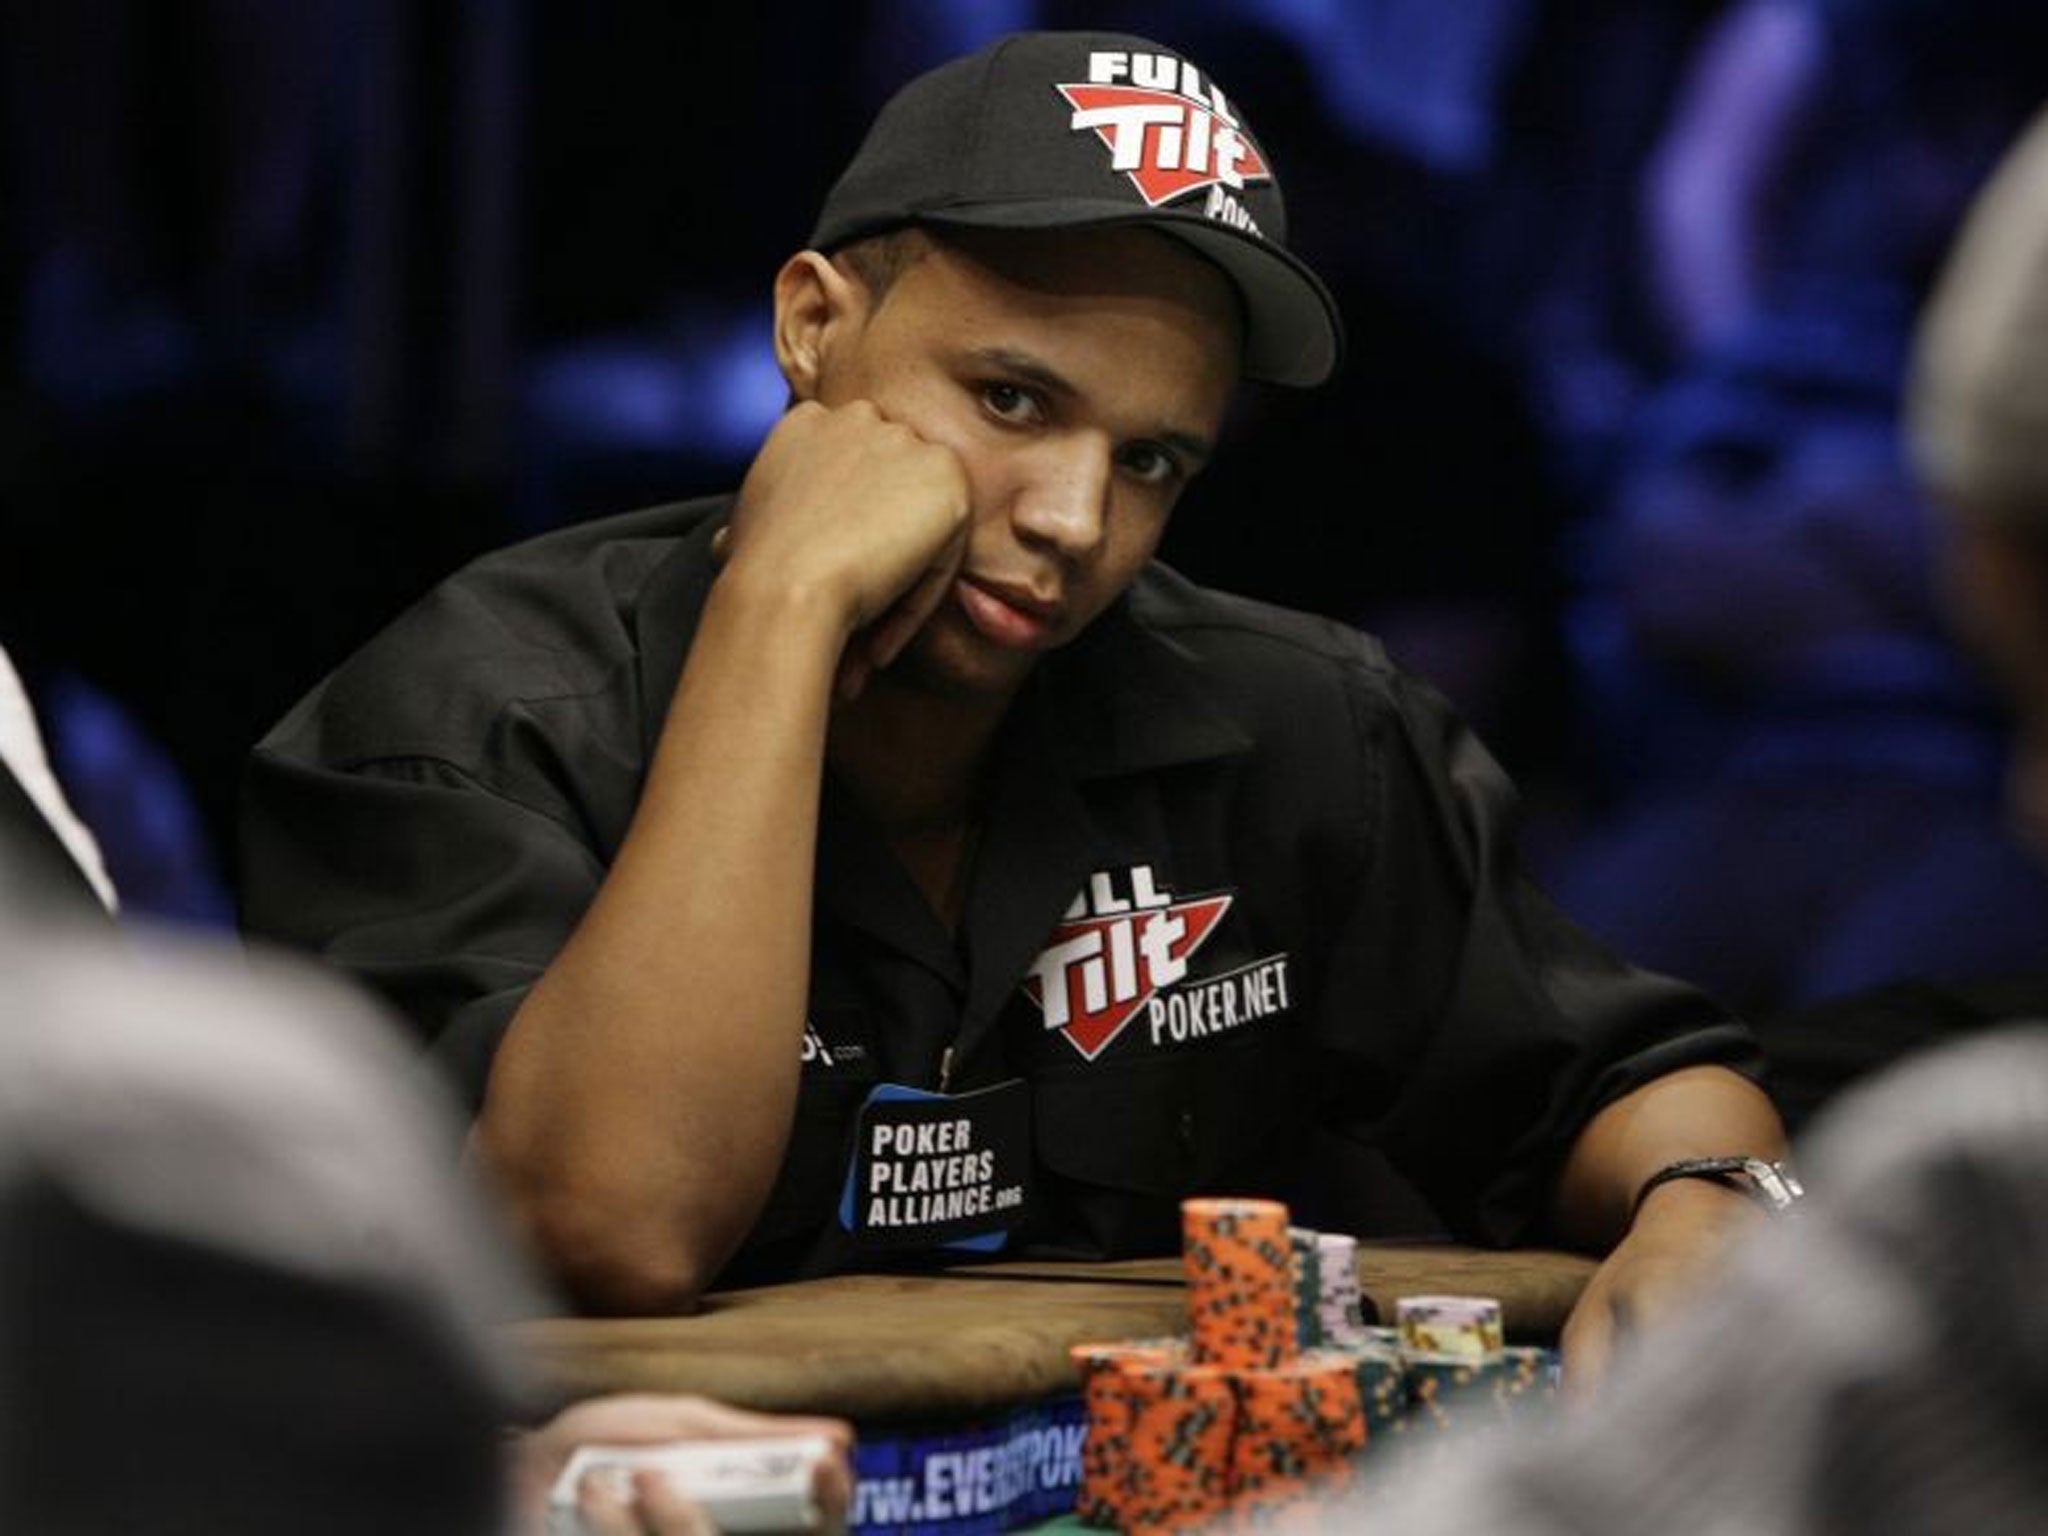 Phil Ivey is considered one of the best poker players in the world